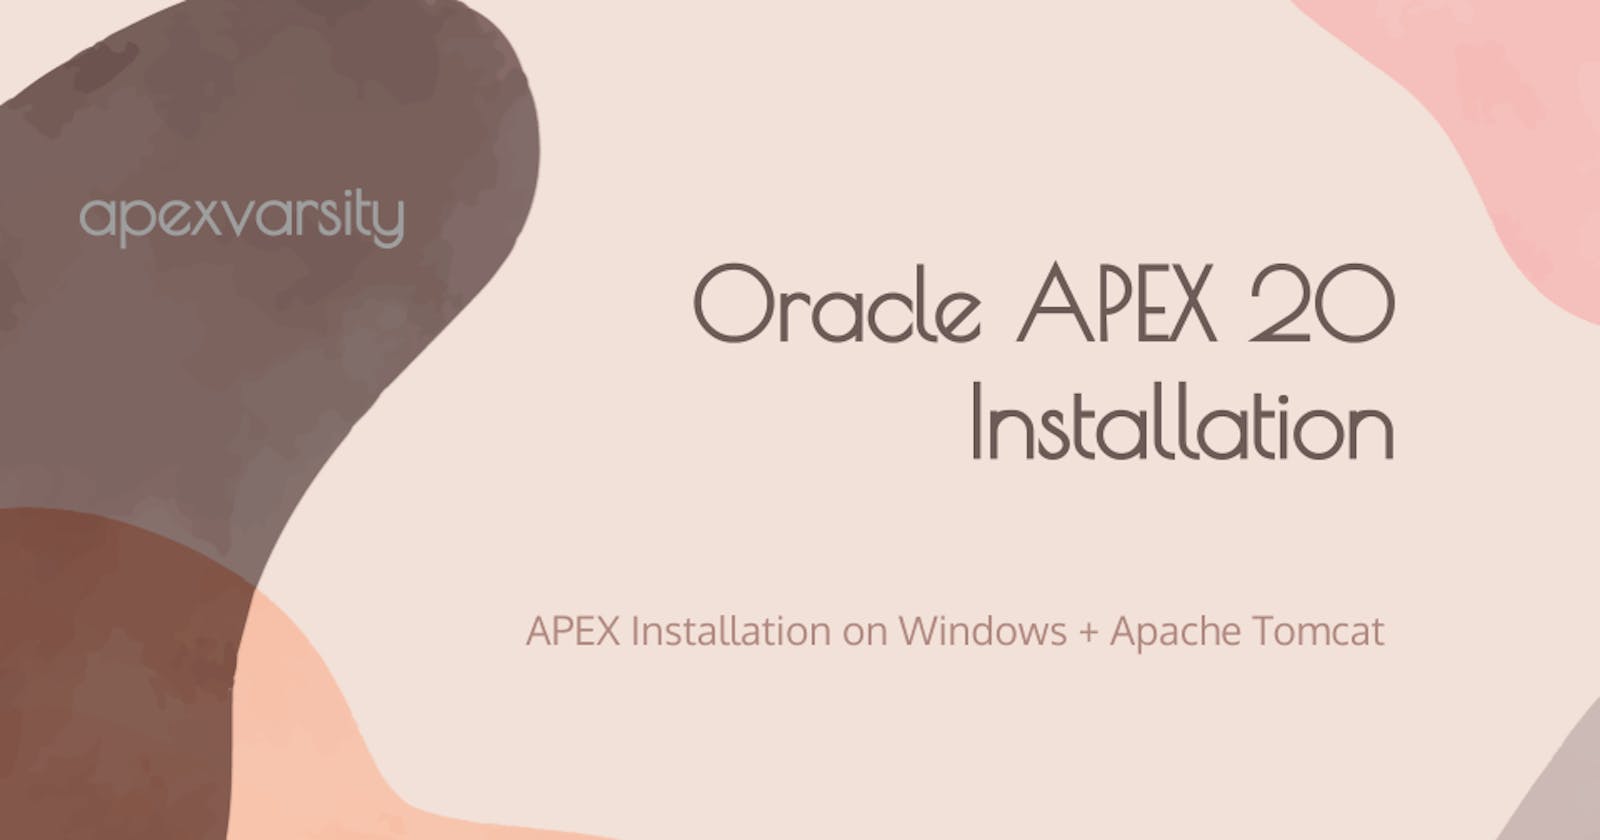 How to install Oracle APEX v20 on Windows?